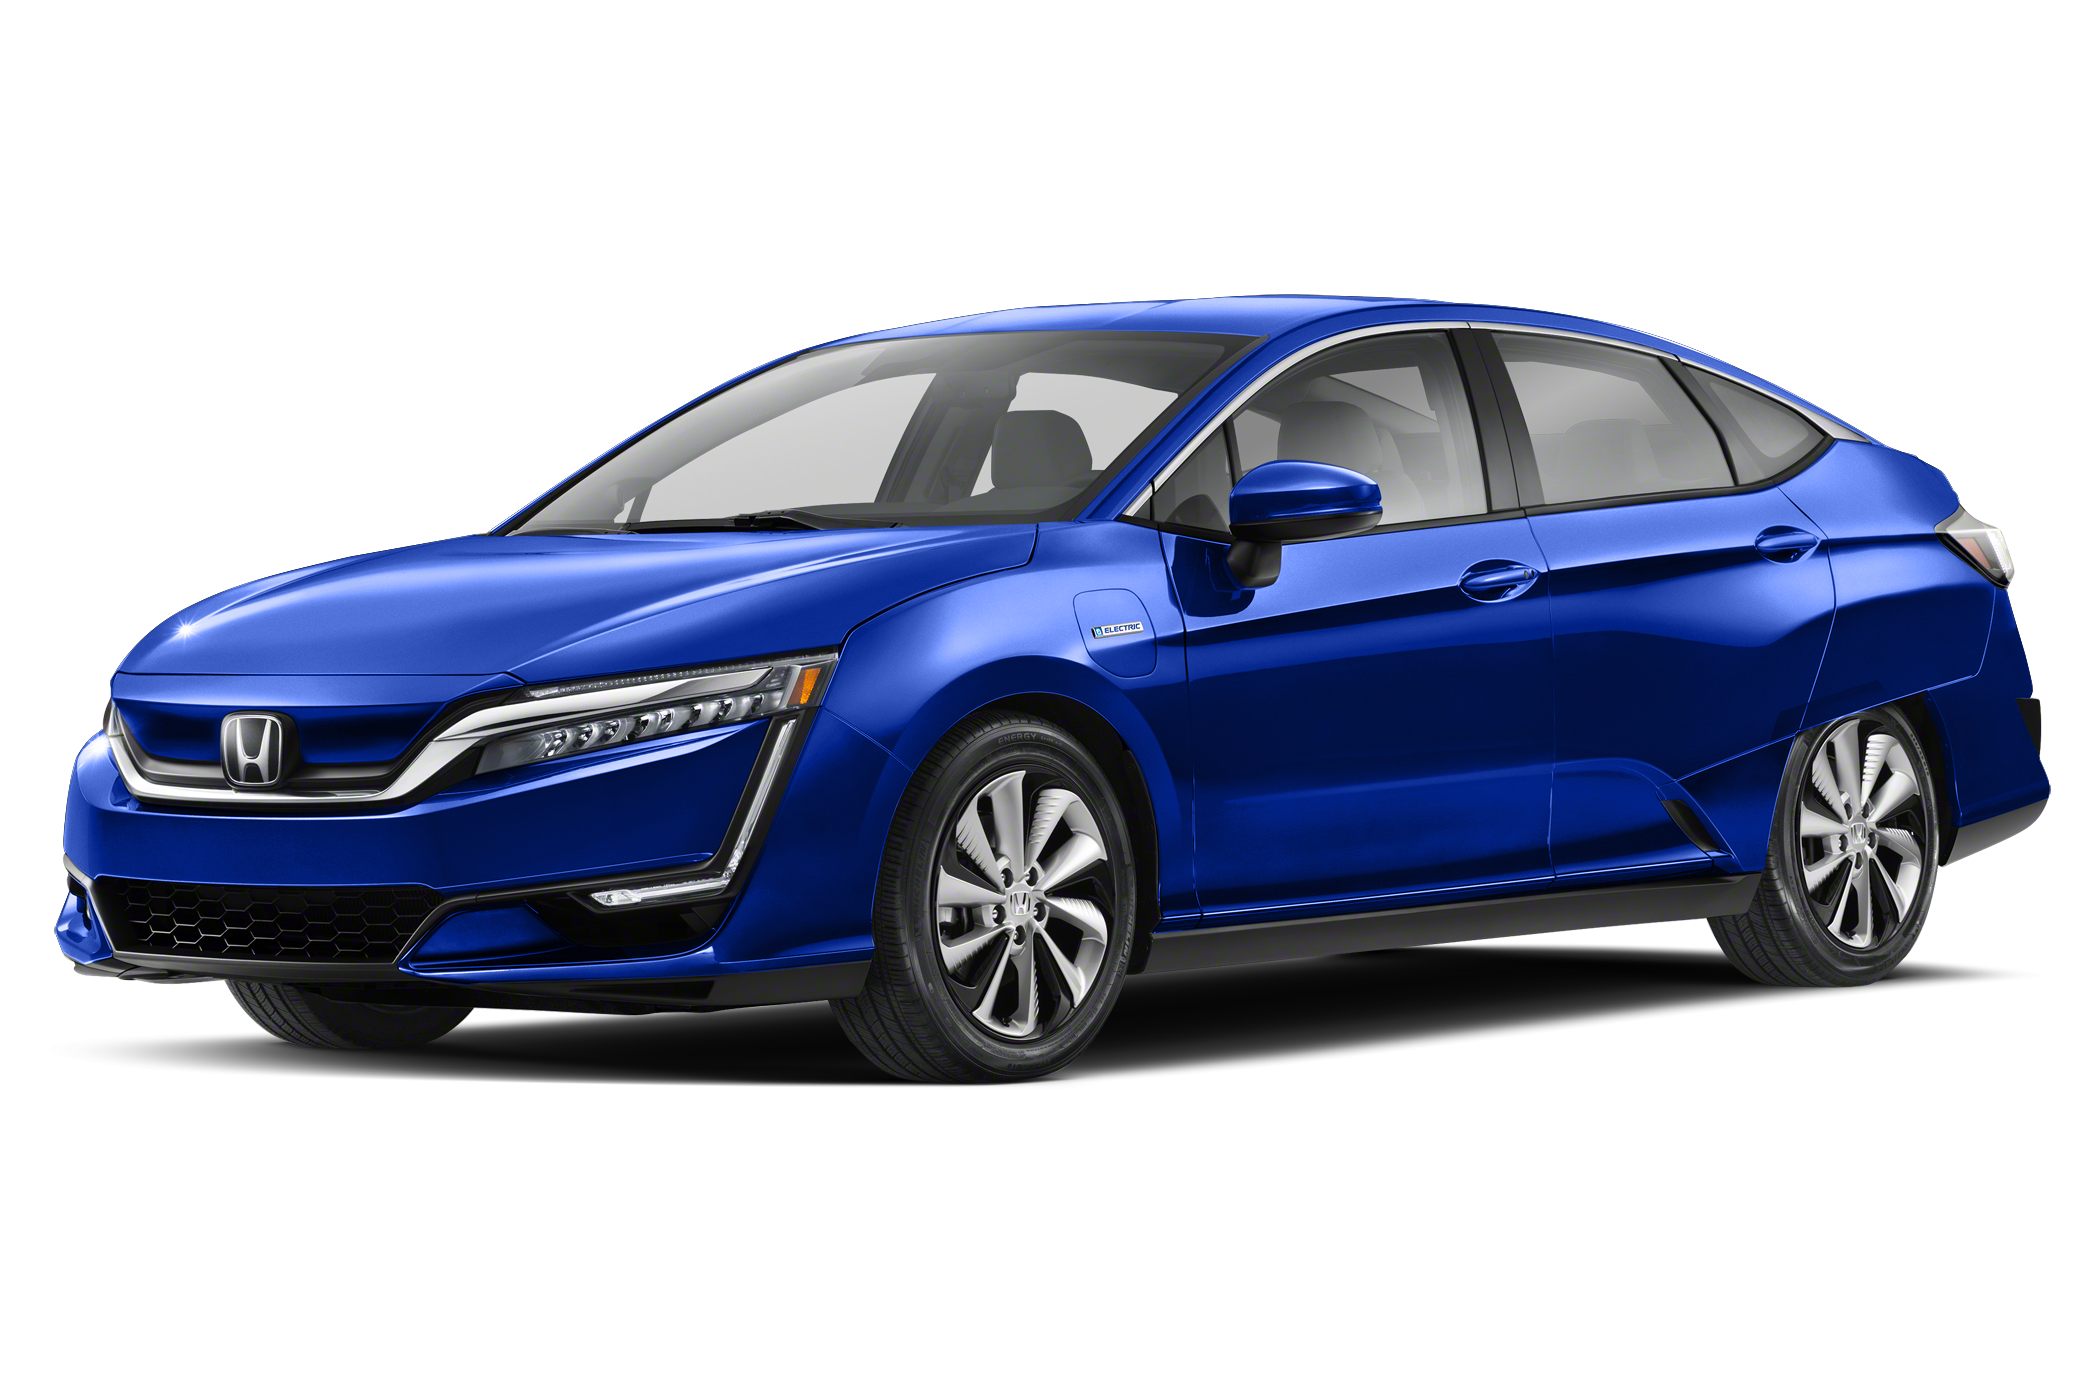 Honda Clarity Electric Discontinued After 2019 Model Year Autoblog